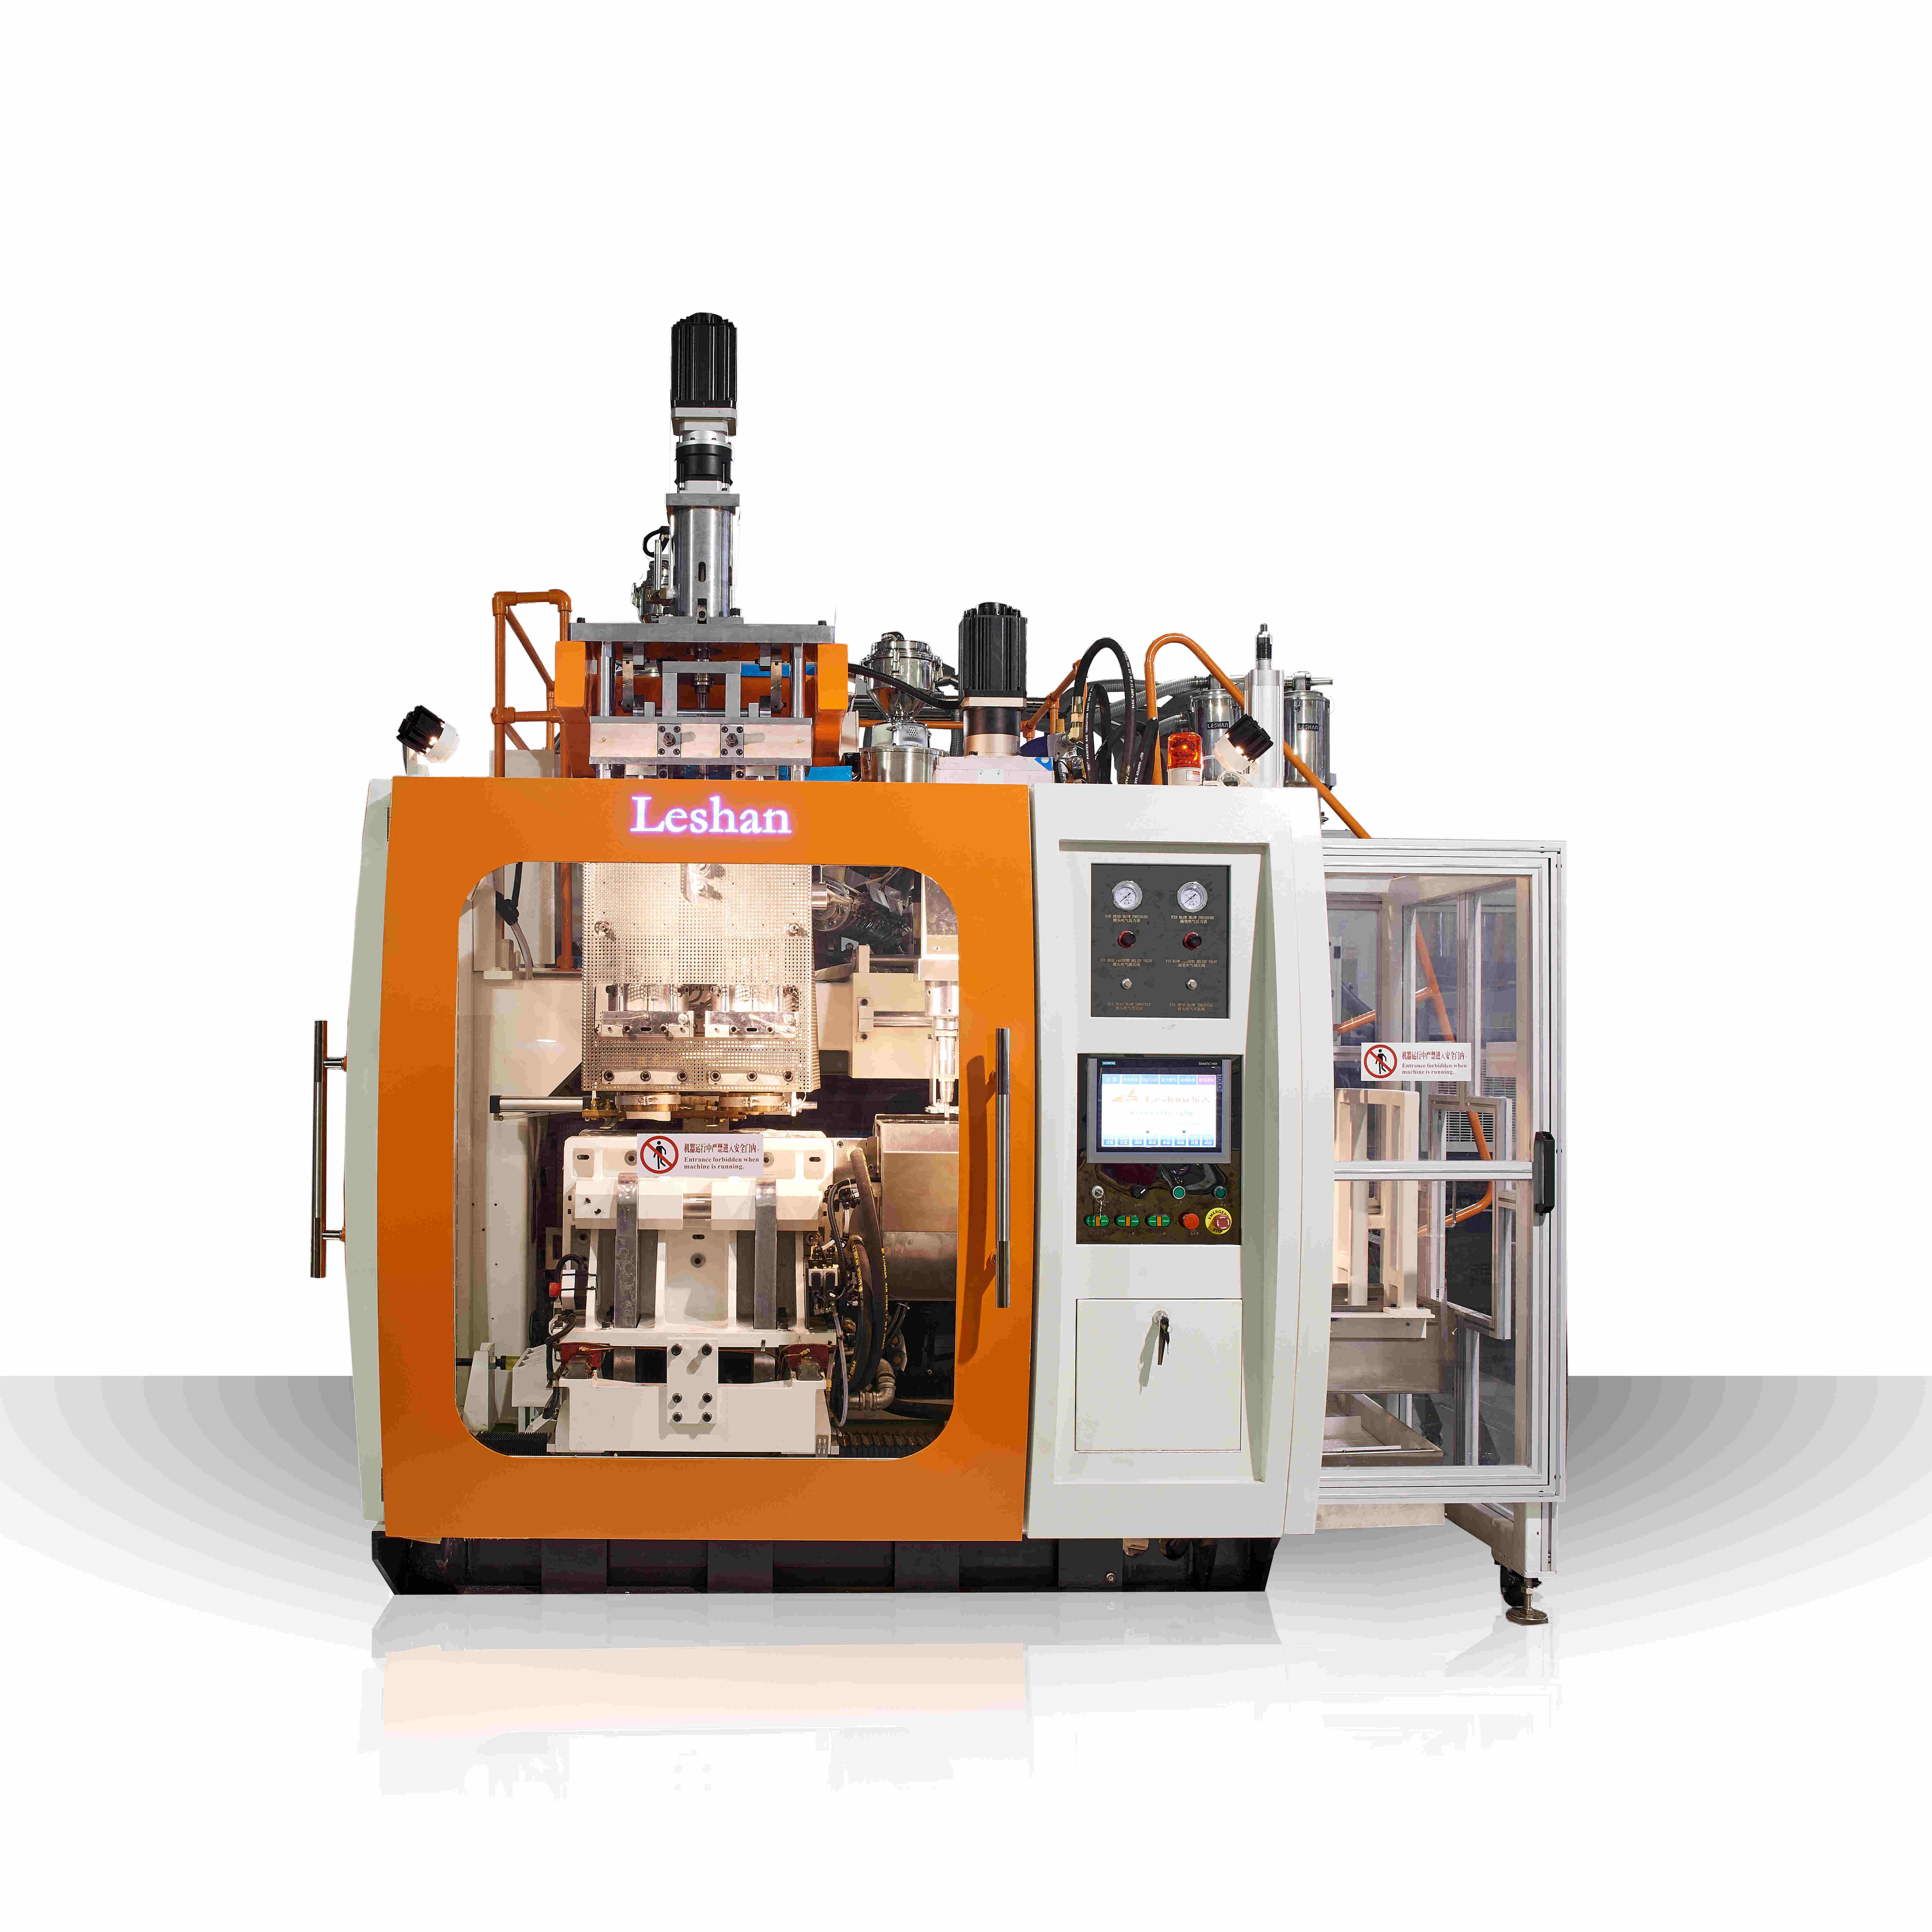 Which industries can apply 30 liter blow molding machine?